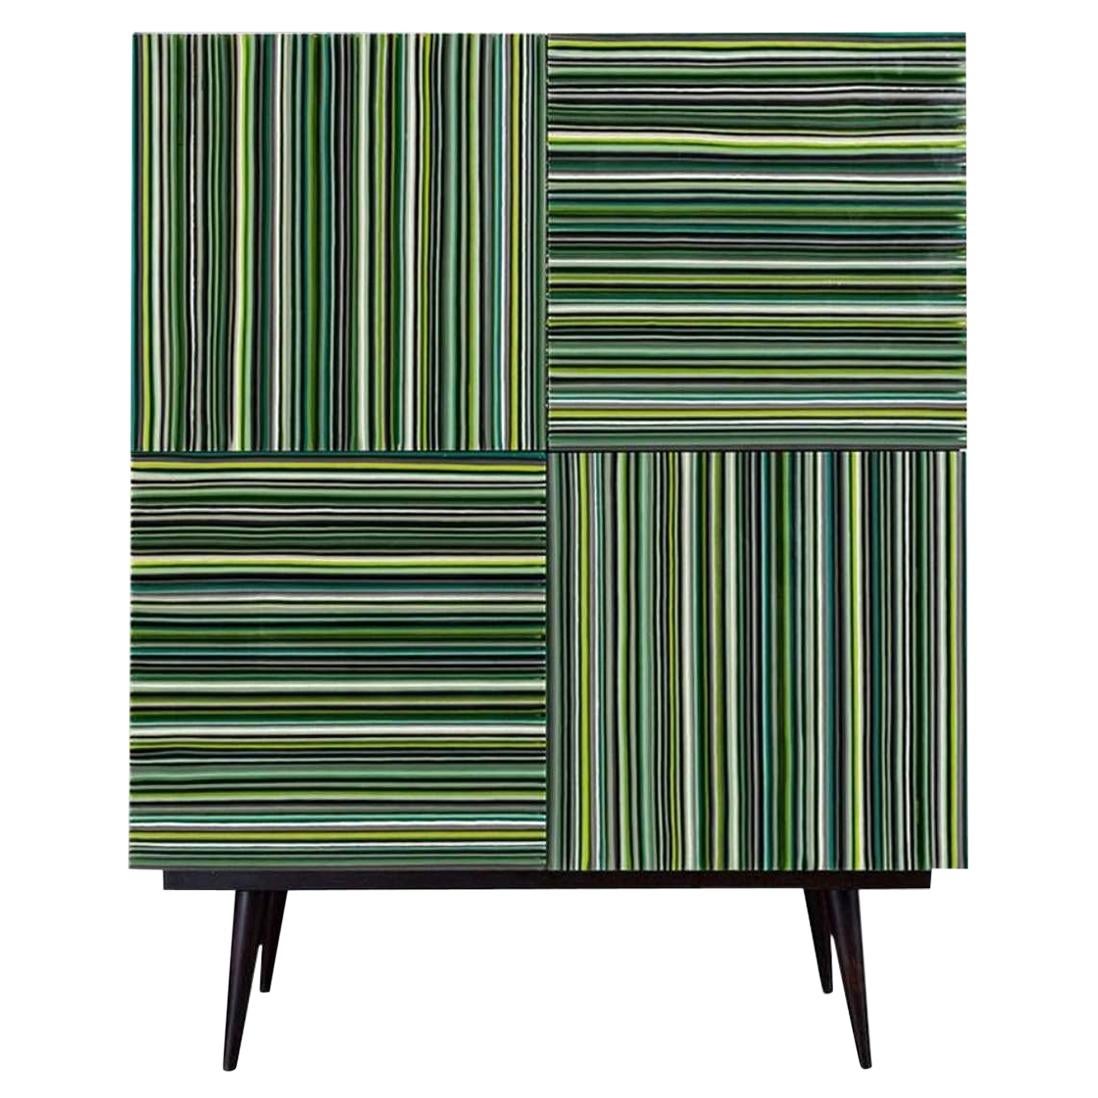 Bar Green Hues Multi-Color Barcode Glass Doors by Orfeo Quagliata For Sale